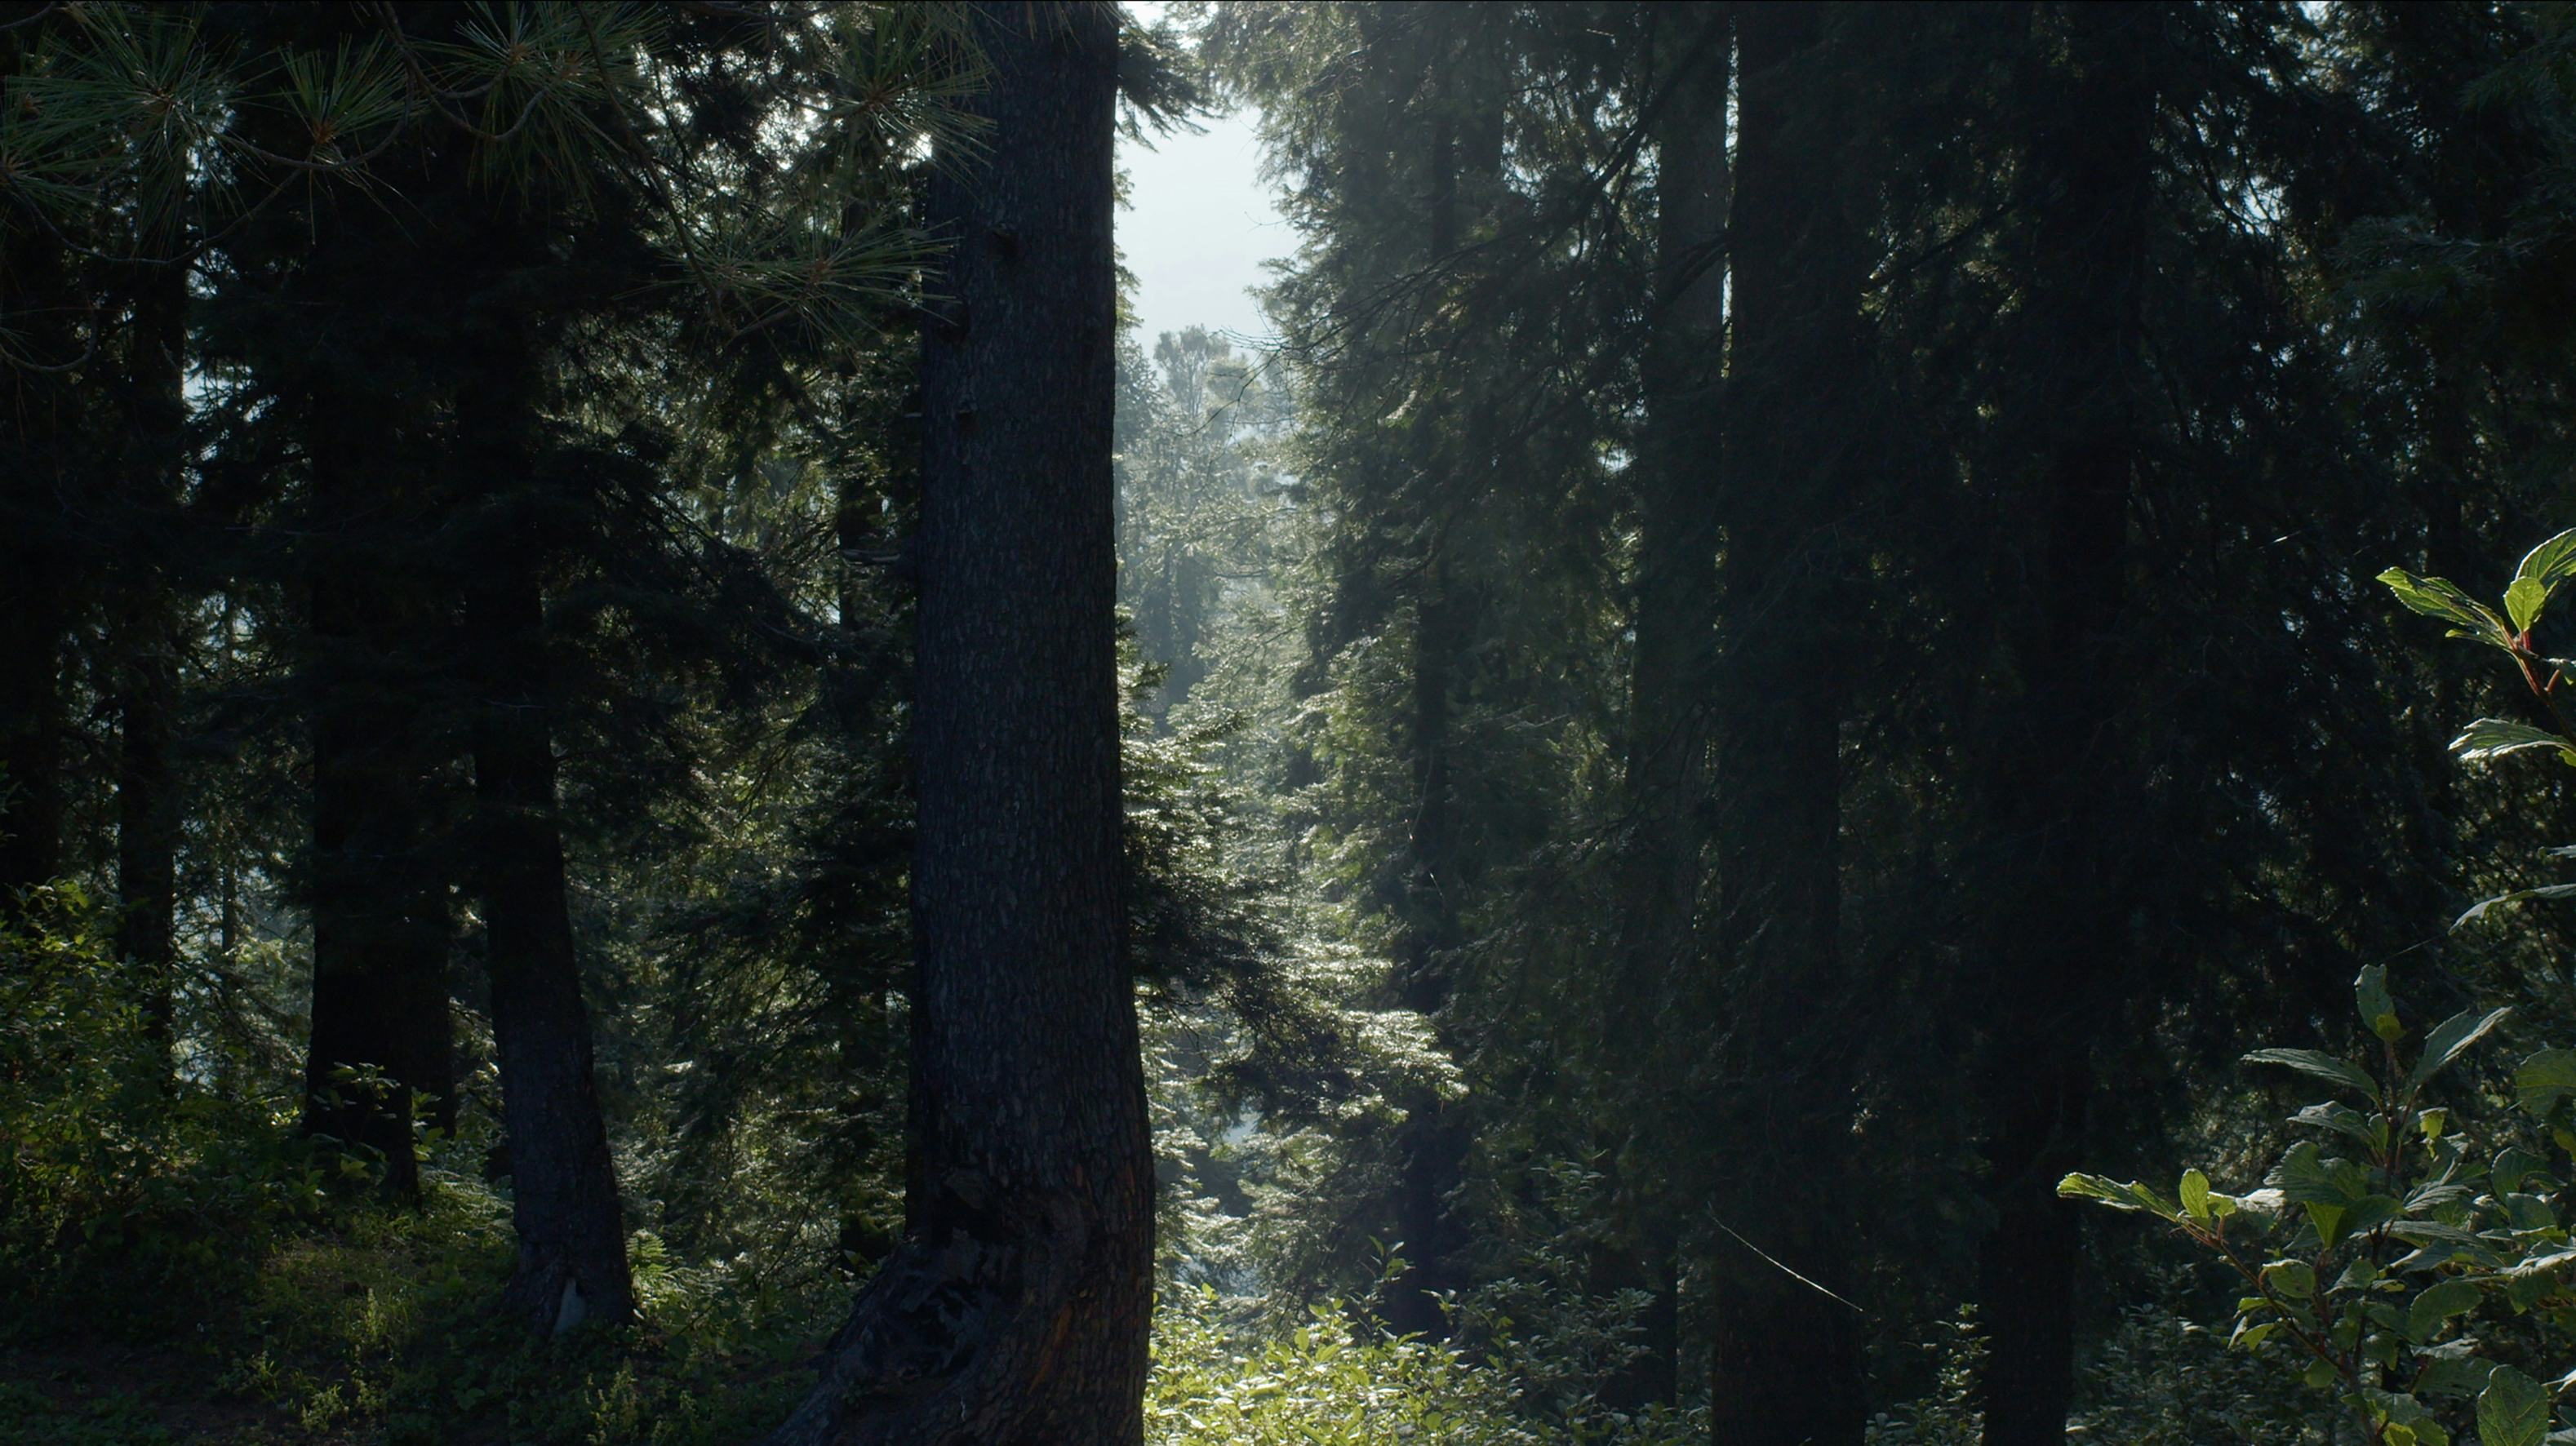 A still from a film depicting the forest with sunshine peaking through.